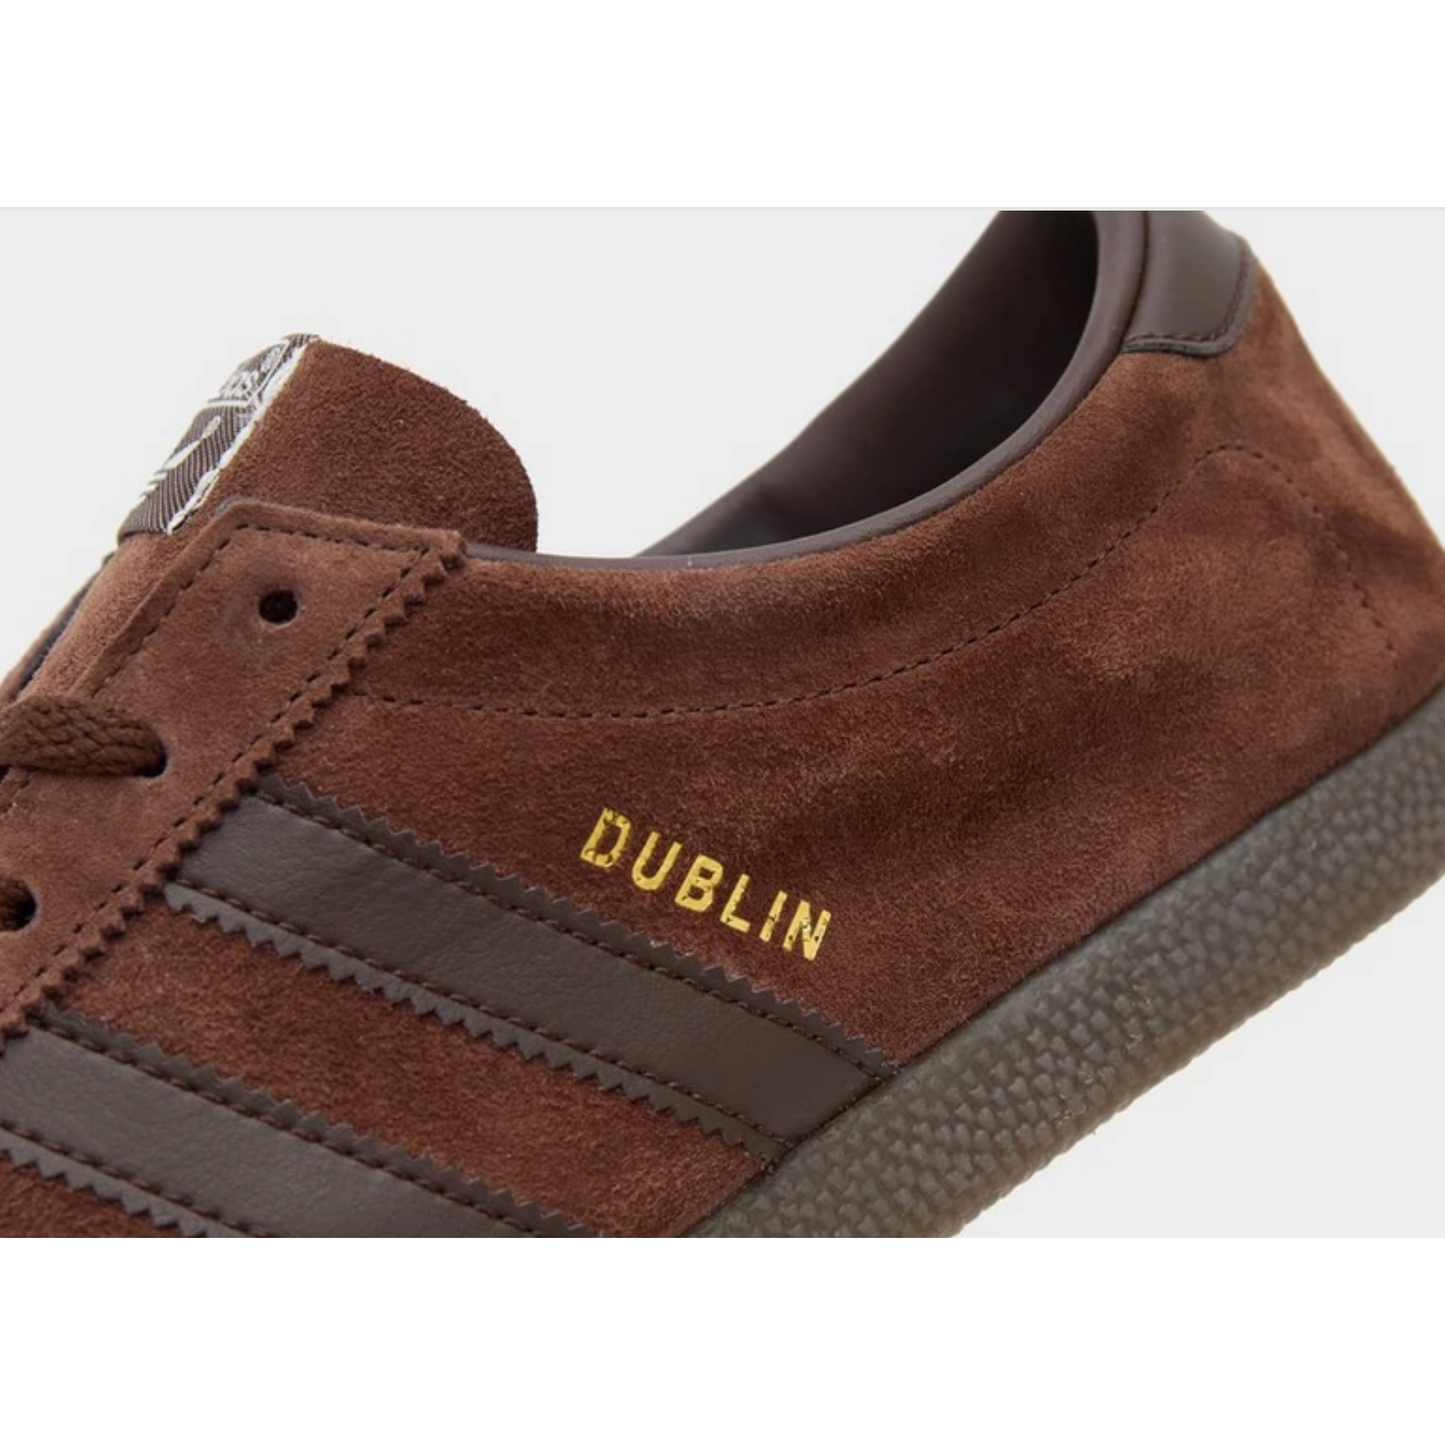 adidas Dublin size? Exclusive Brown by Adidas from £110.00